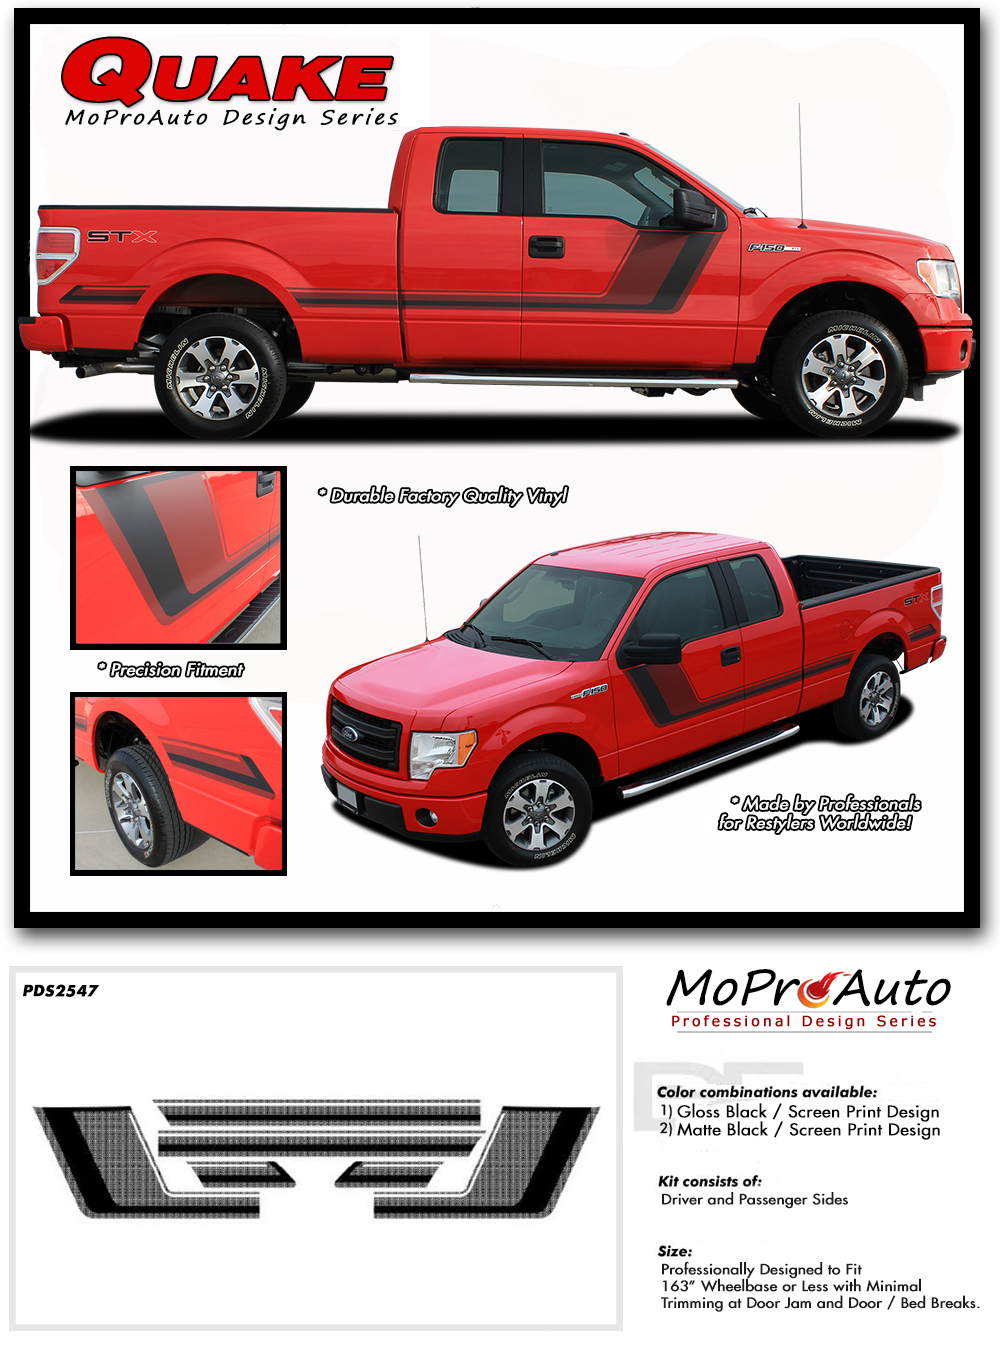 Tremor FX Appearance Package Style Ford F-Series F-150 Vinyl Graphics Stripes and Decals Kit by MoProAuto Pro Design Series